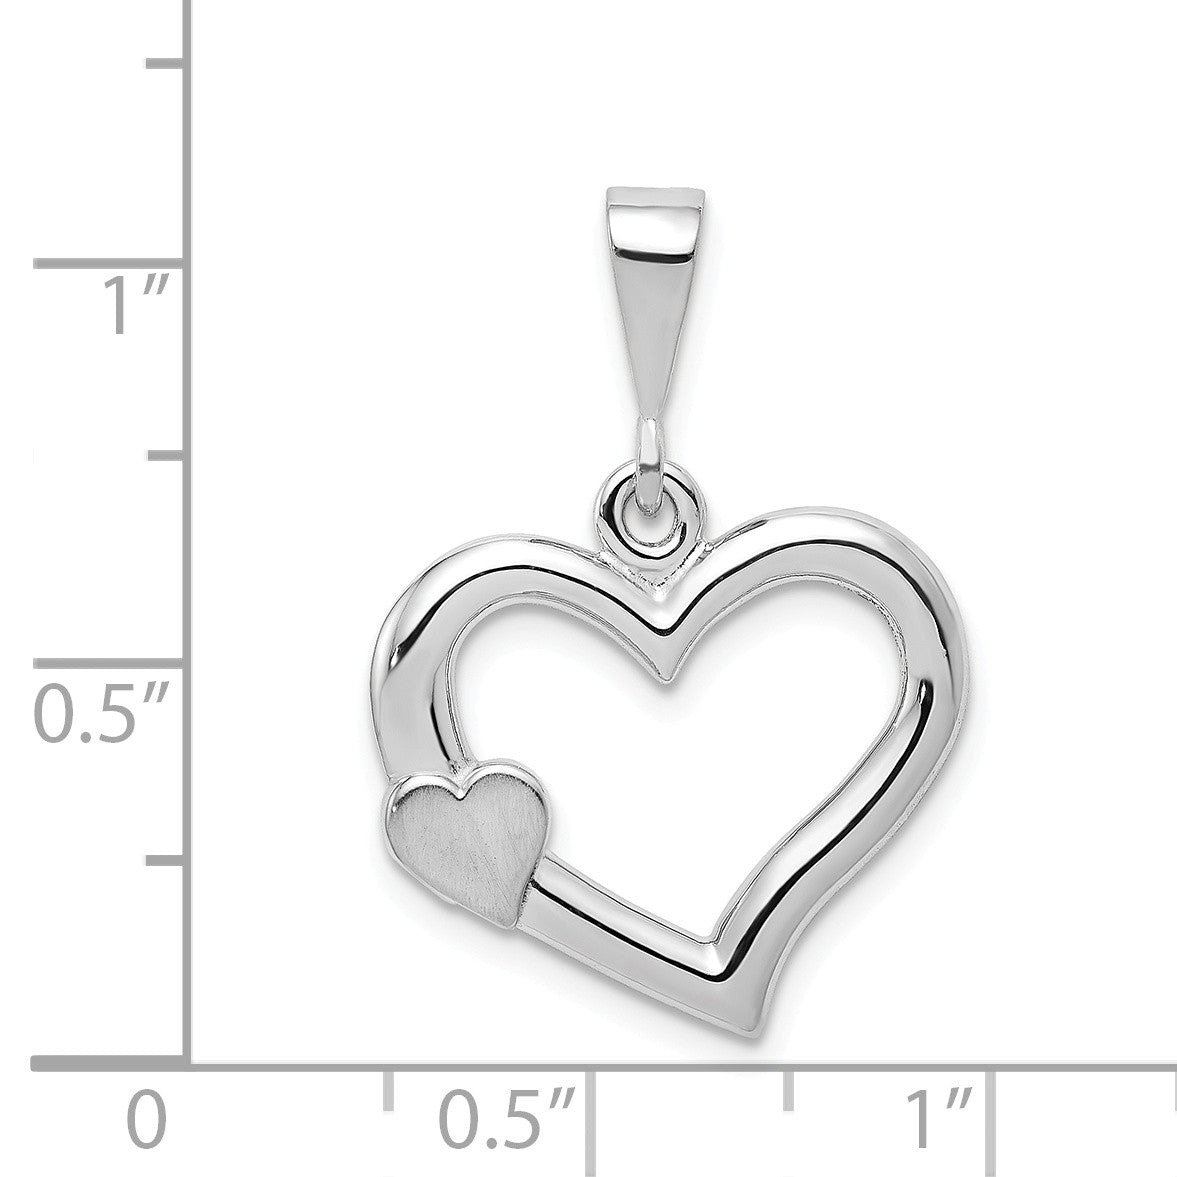 Alternate view of the 14k White Gold Satin Heart on Heart Pendant, 19mm by The Black Bow Jewelry Co.